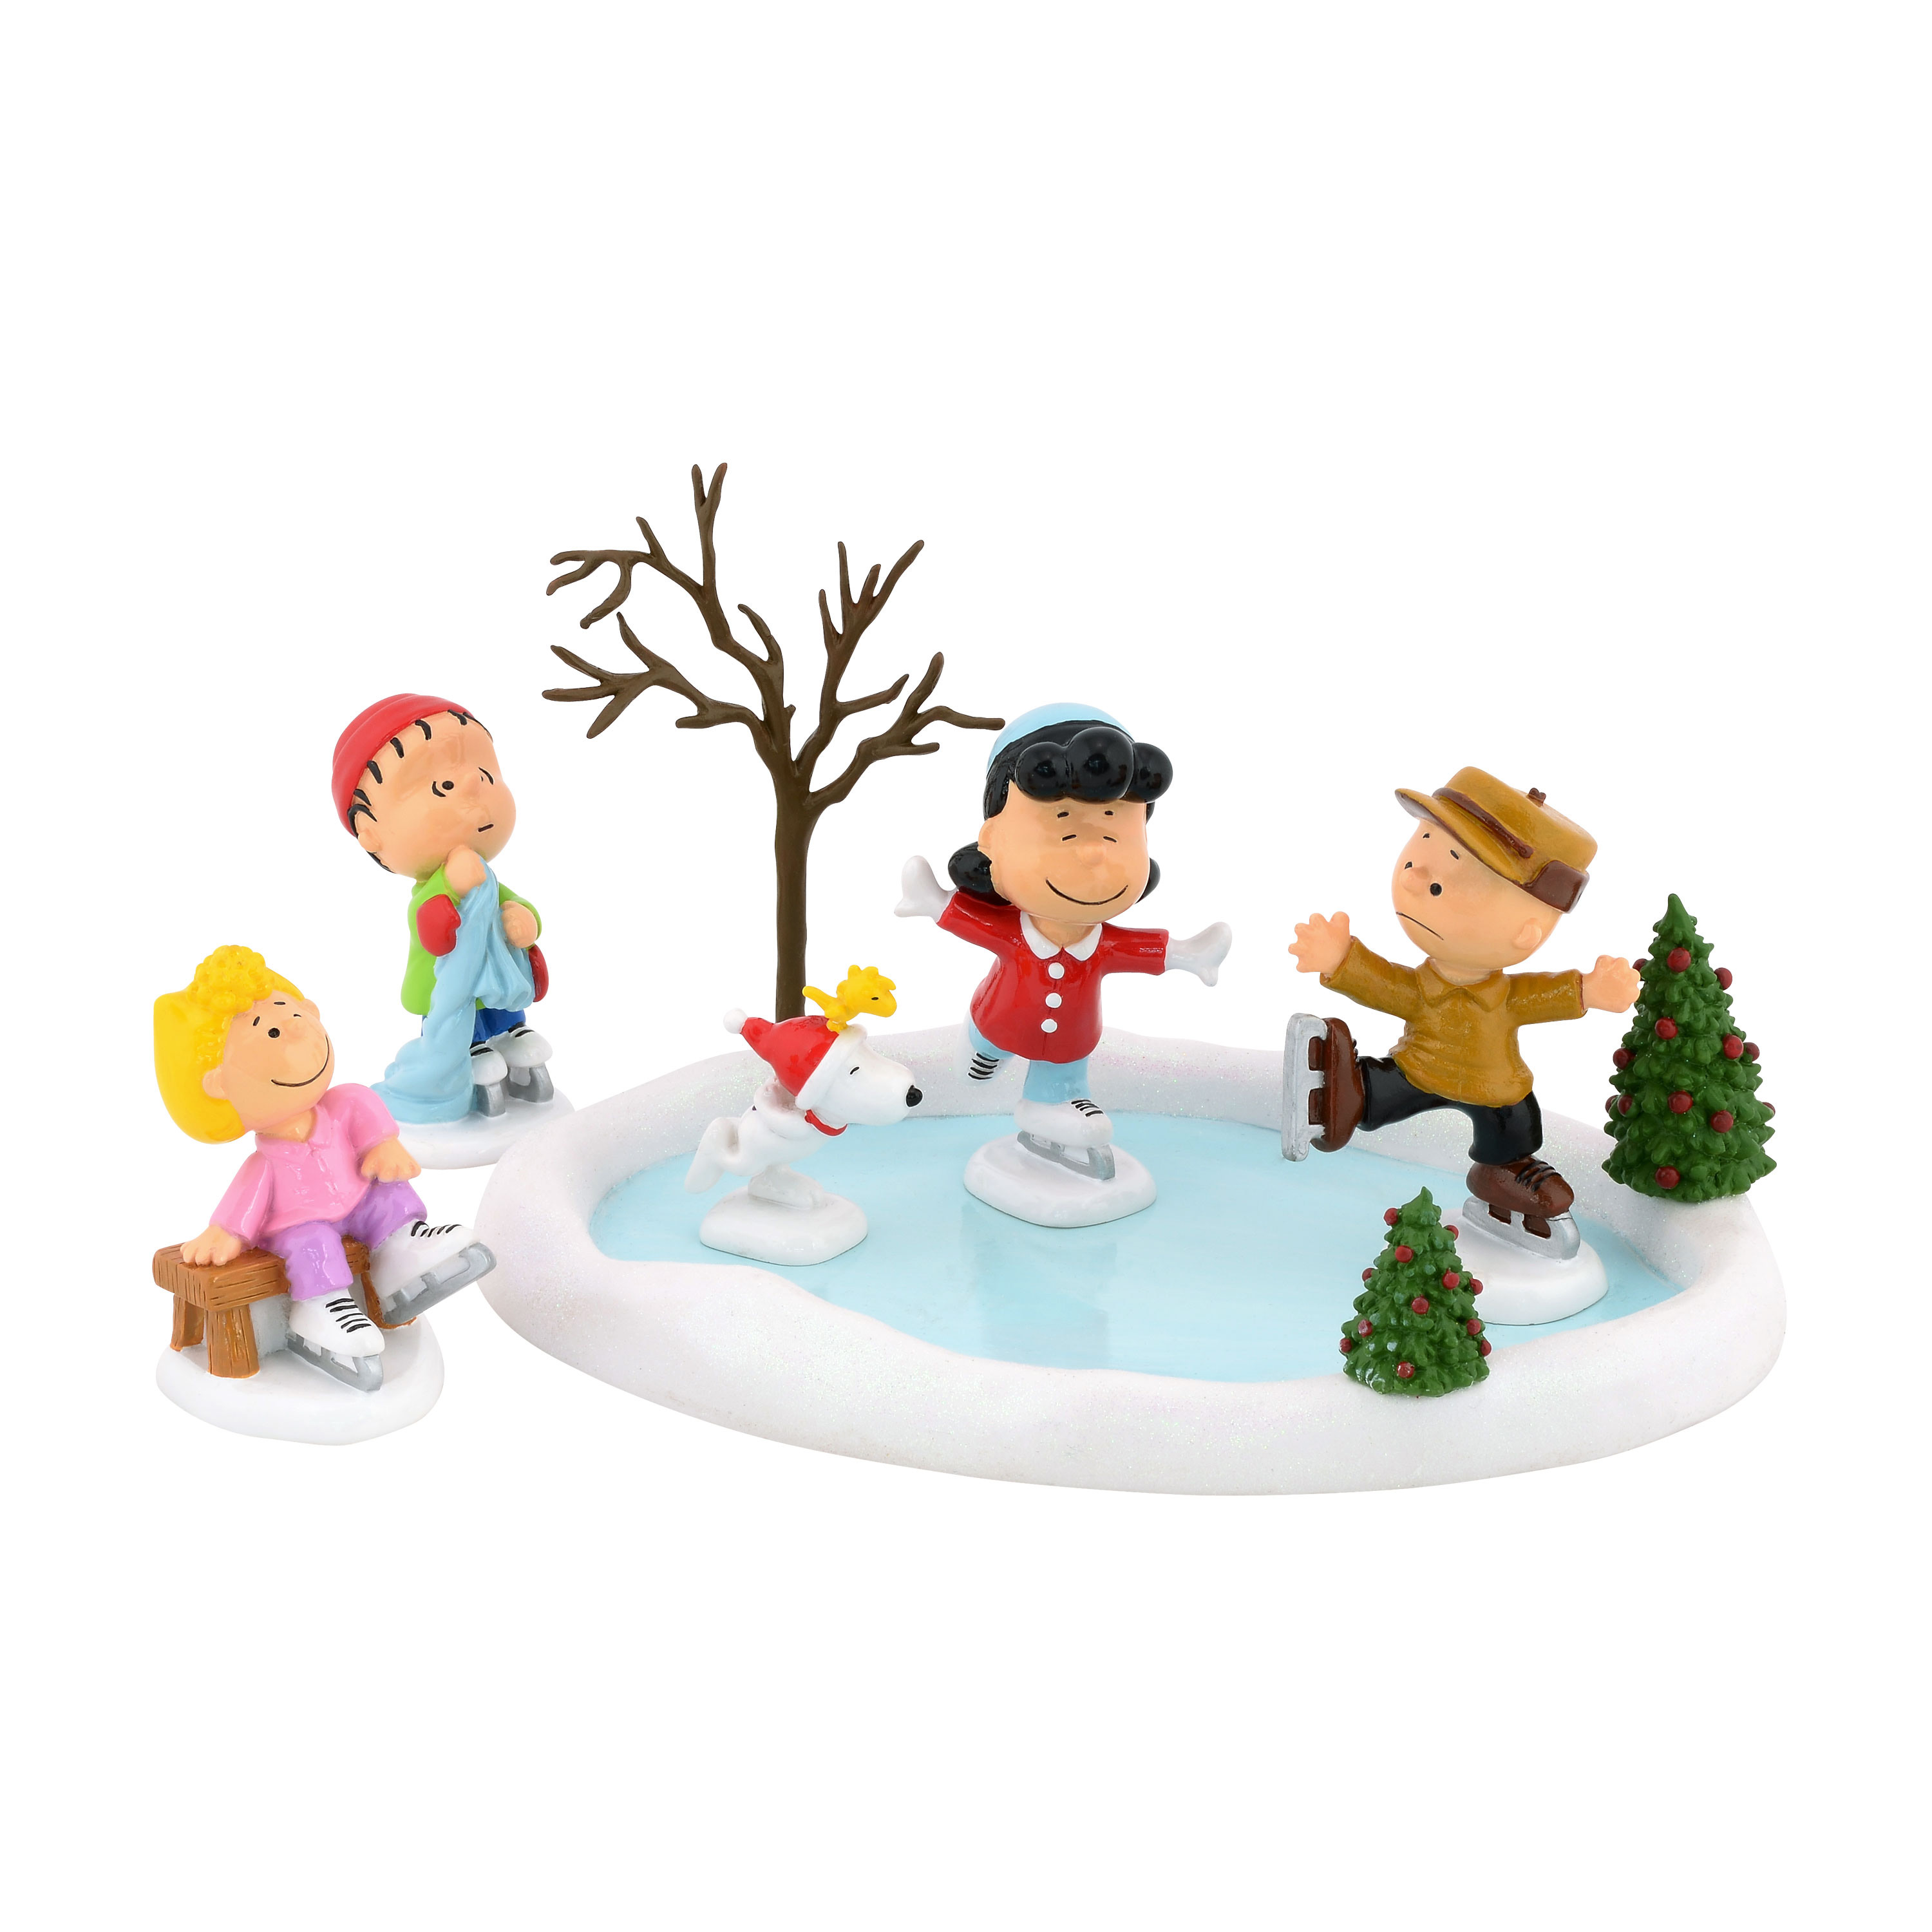 Set of 6 Peanuts Skating Pond and Figurine Collectibles